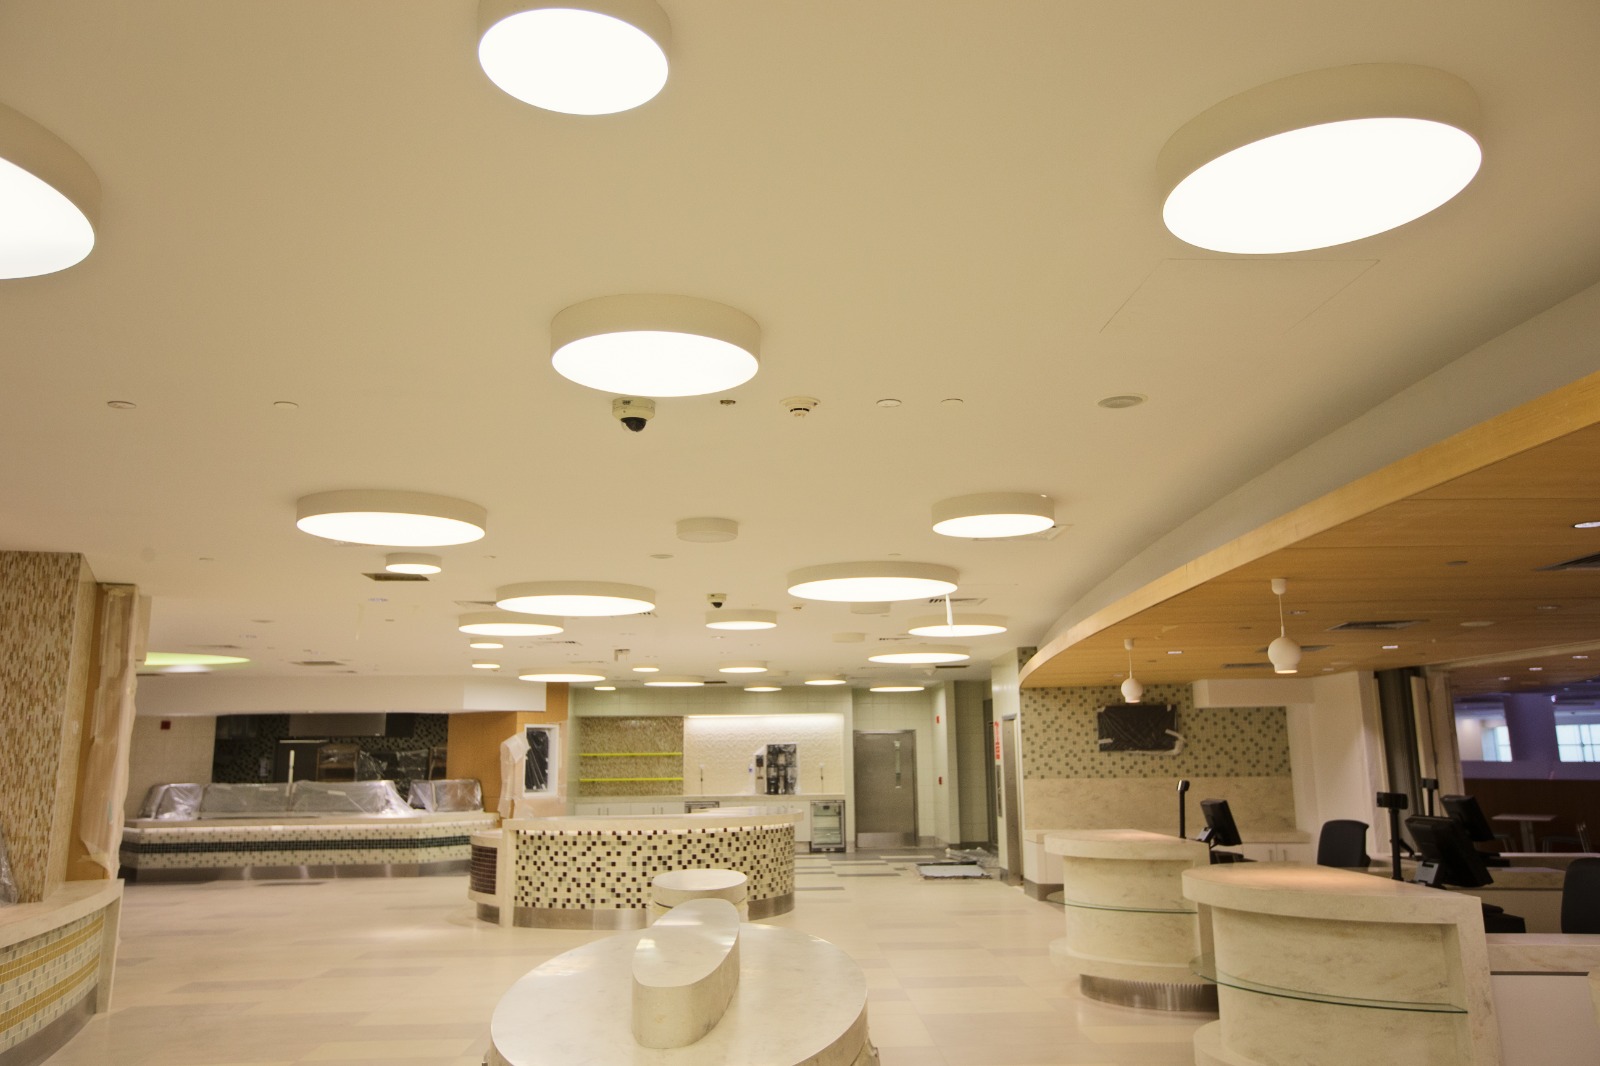 baswa-acoustic-ceilings-reception